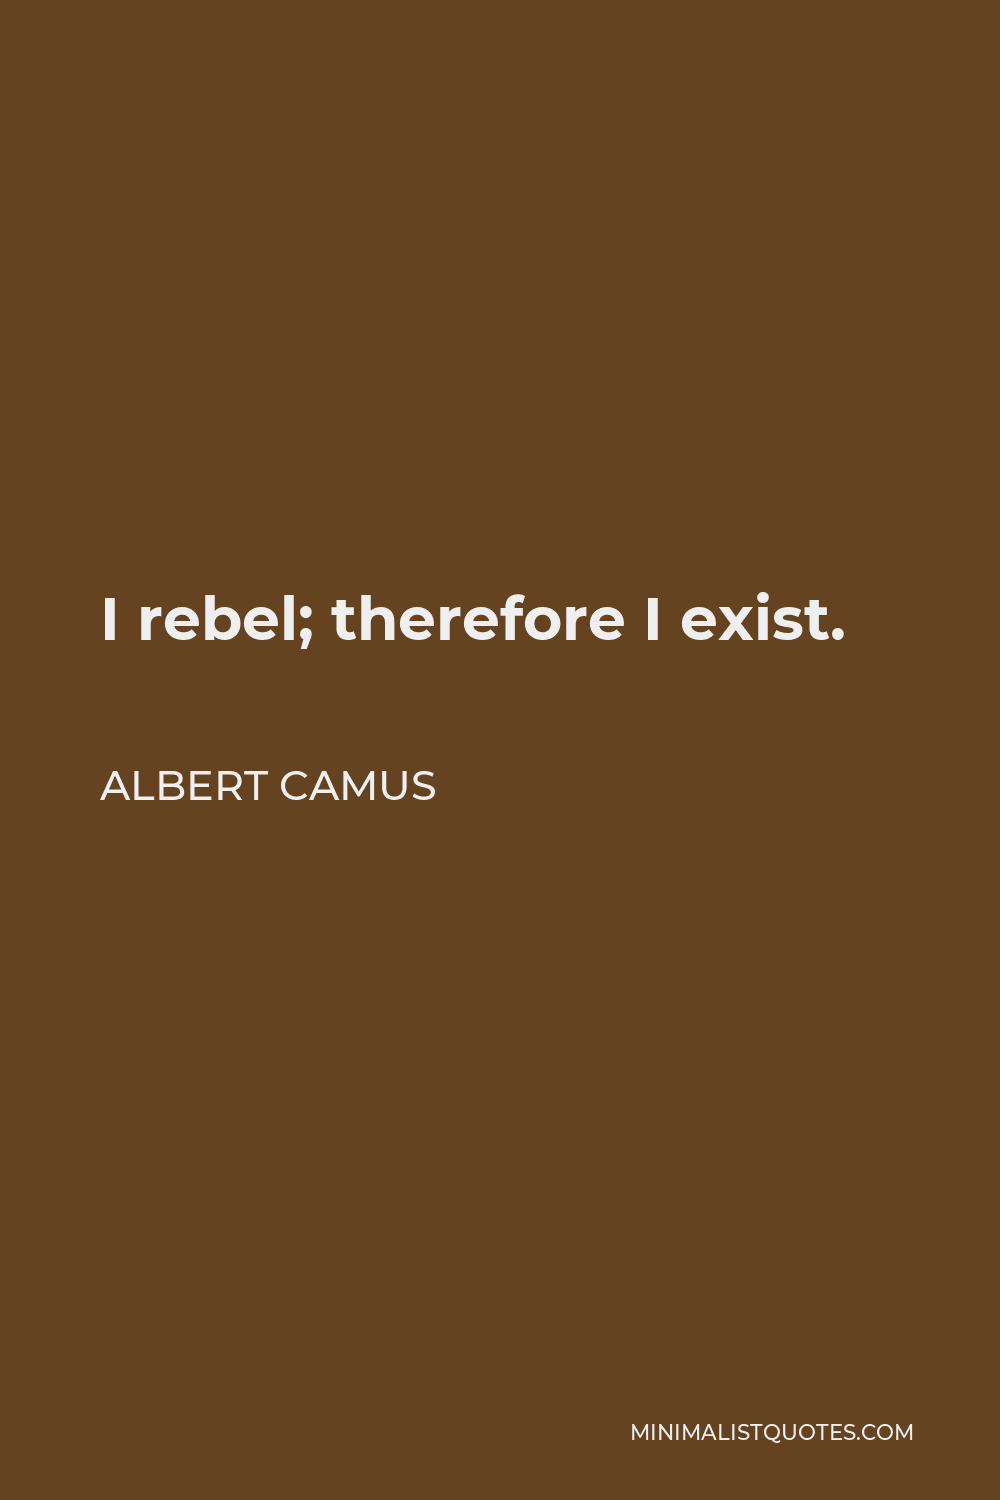 Albert Camus Quote - I rebel; therefore I exist.